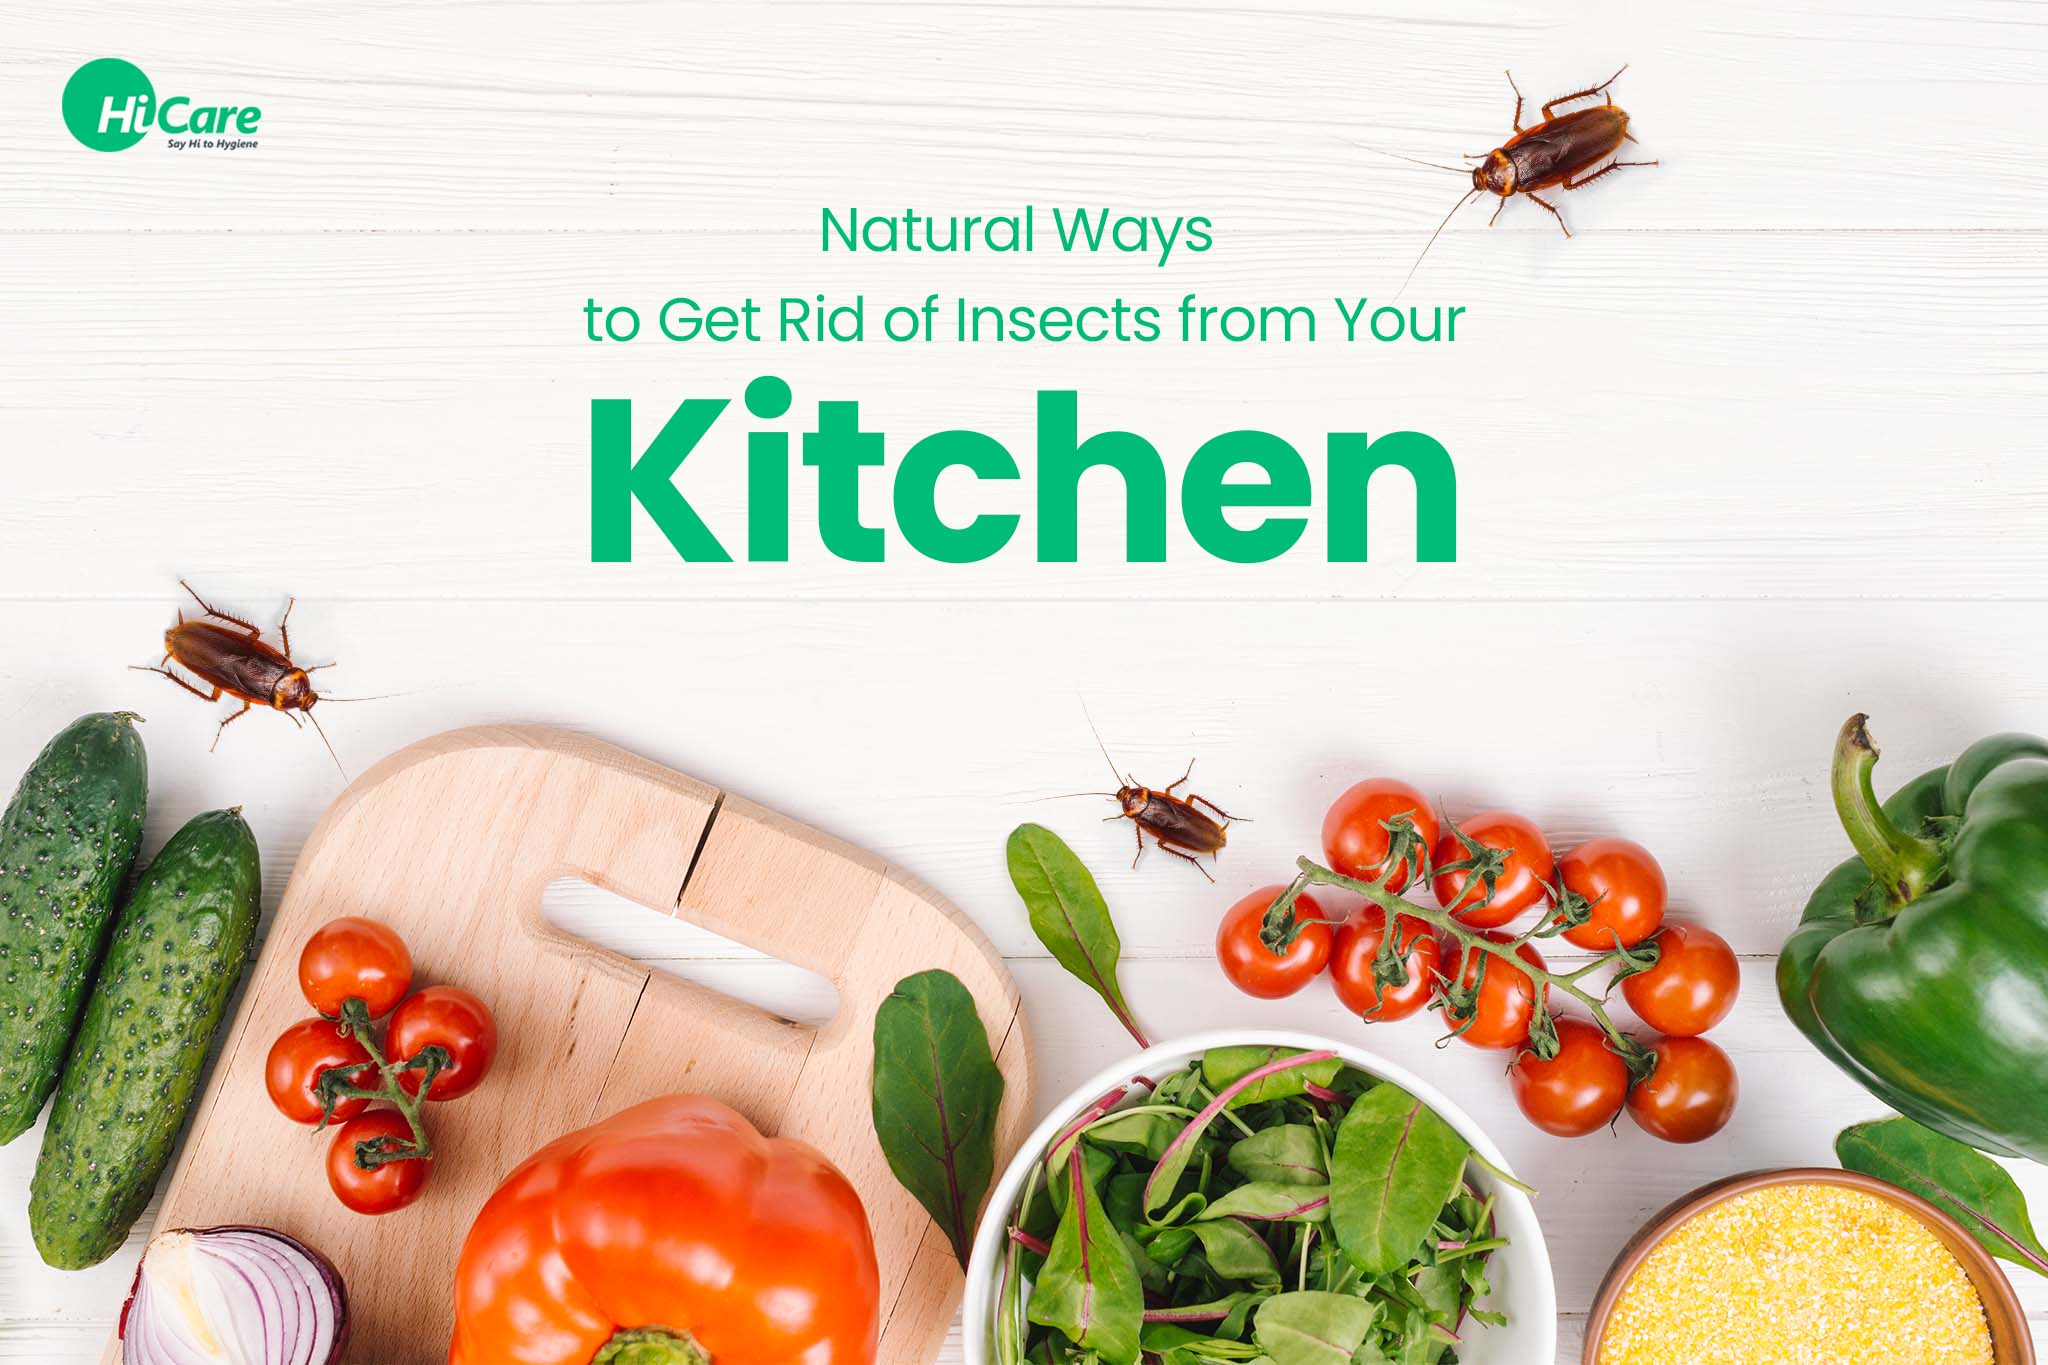 Natural Ways to Get Rid of Small Insects in Kitchen